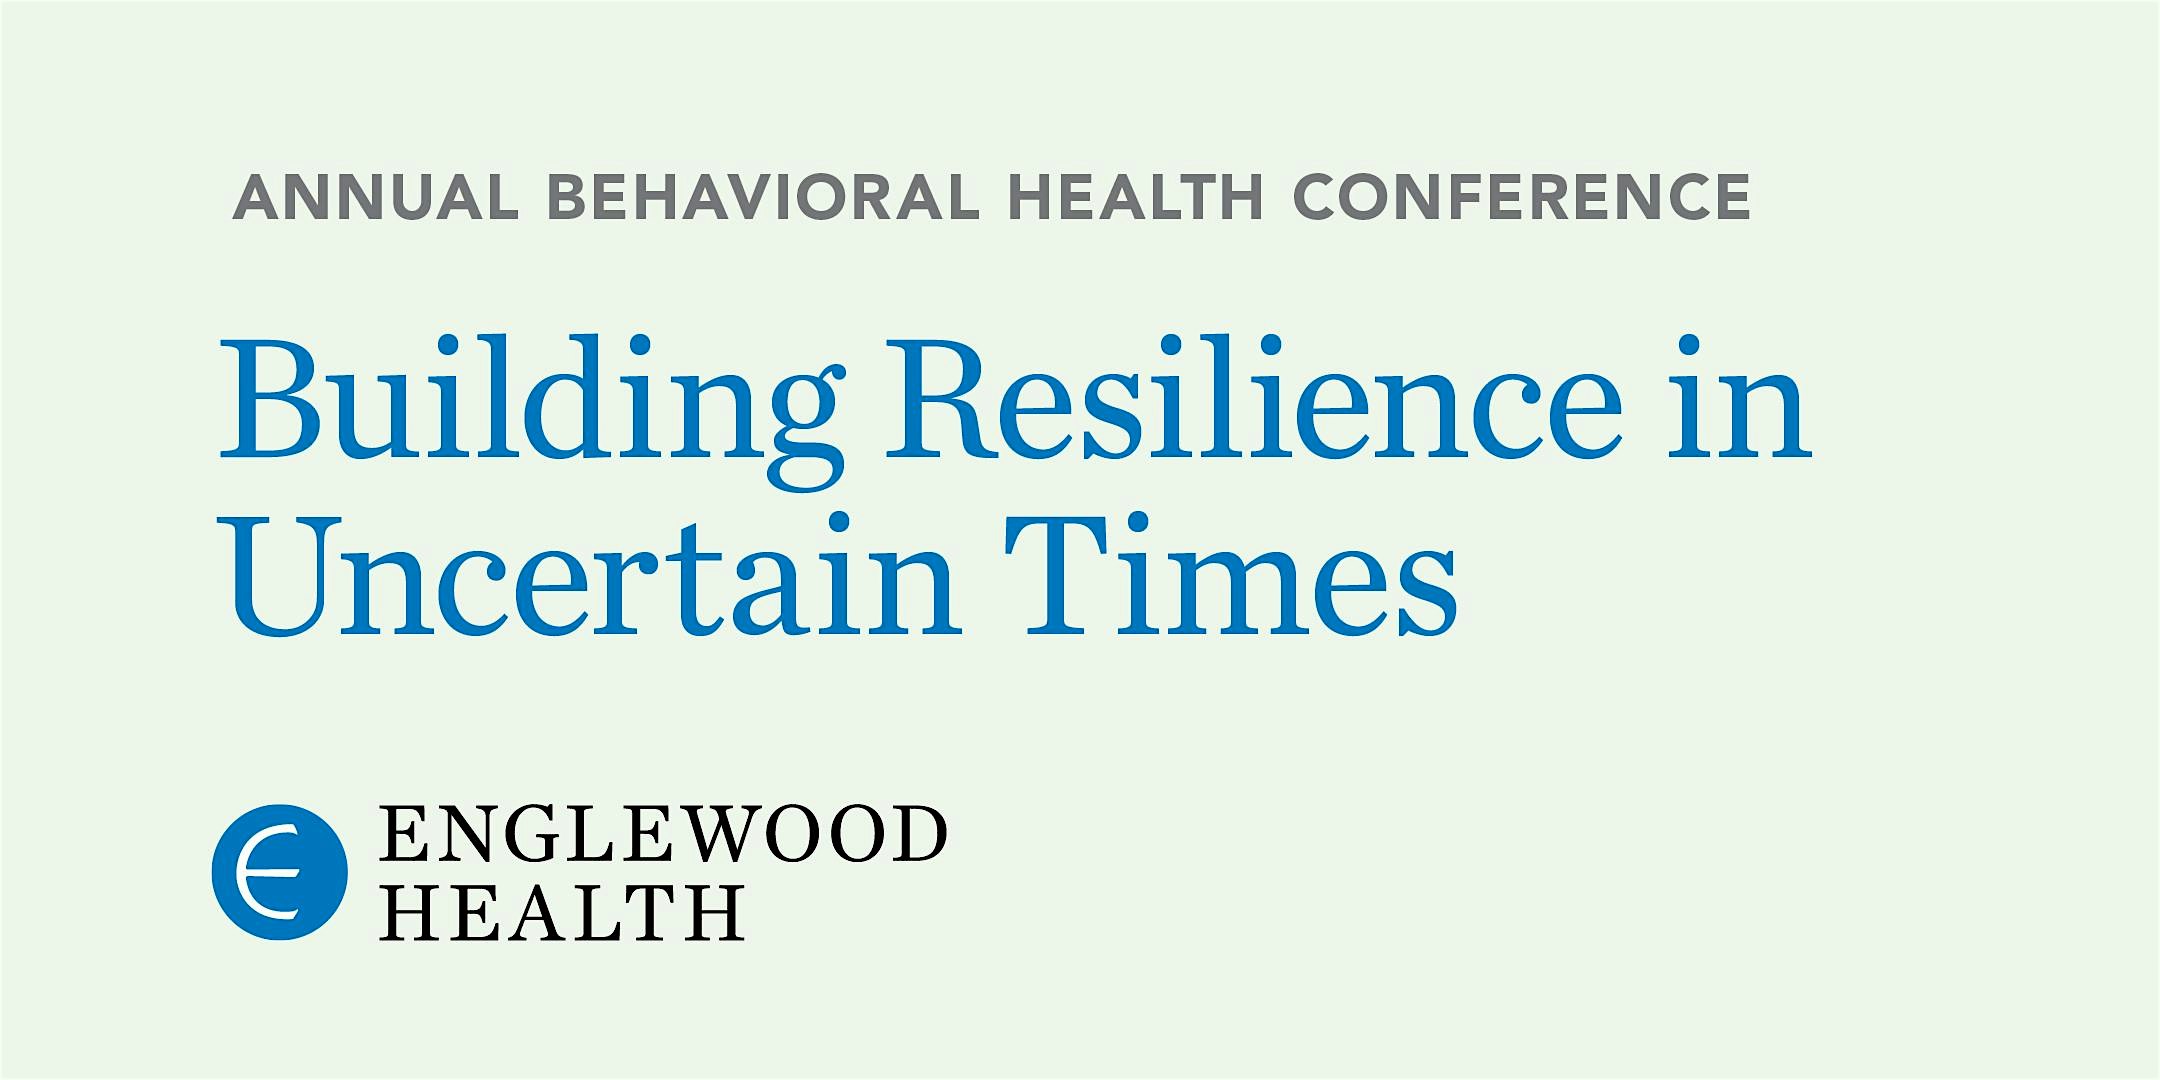 More info: Behavioral Health Conference 2022: Building Resilience in Uncertain Times